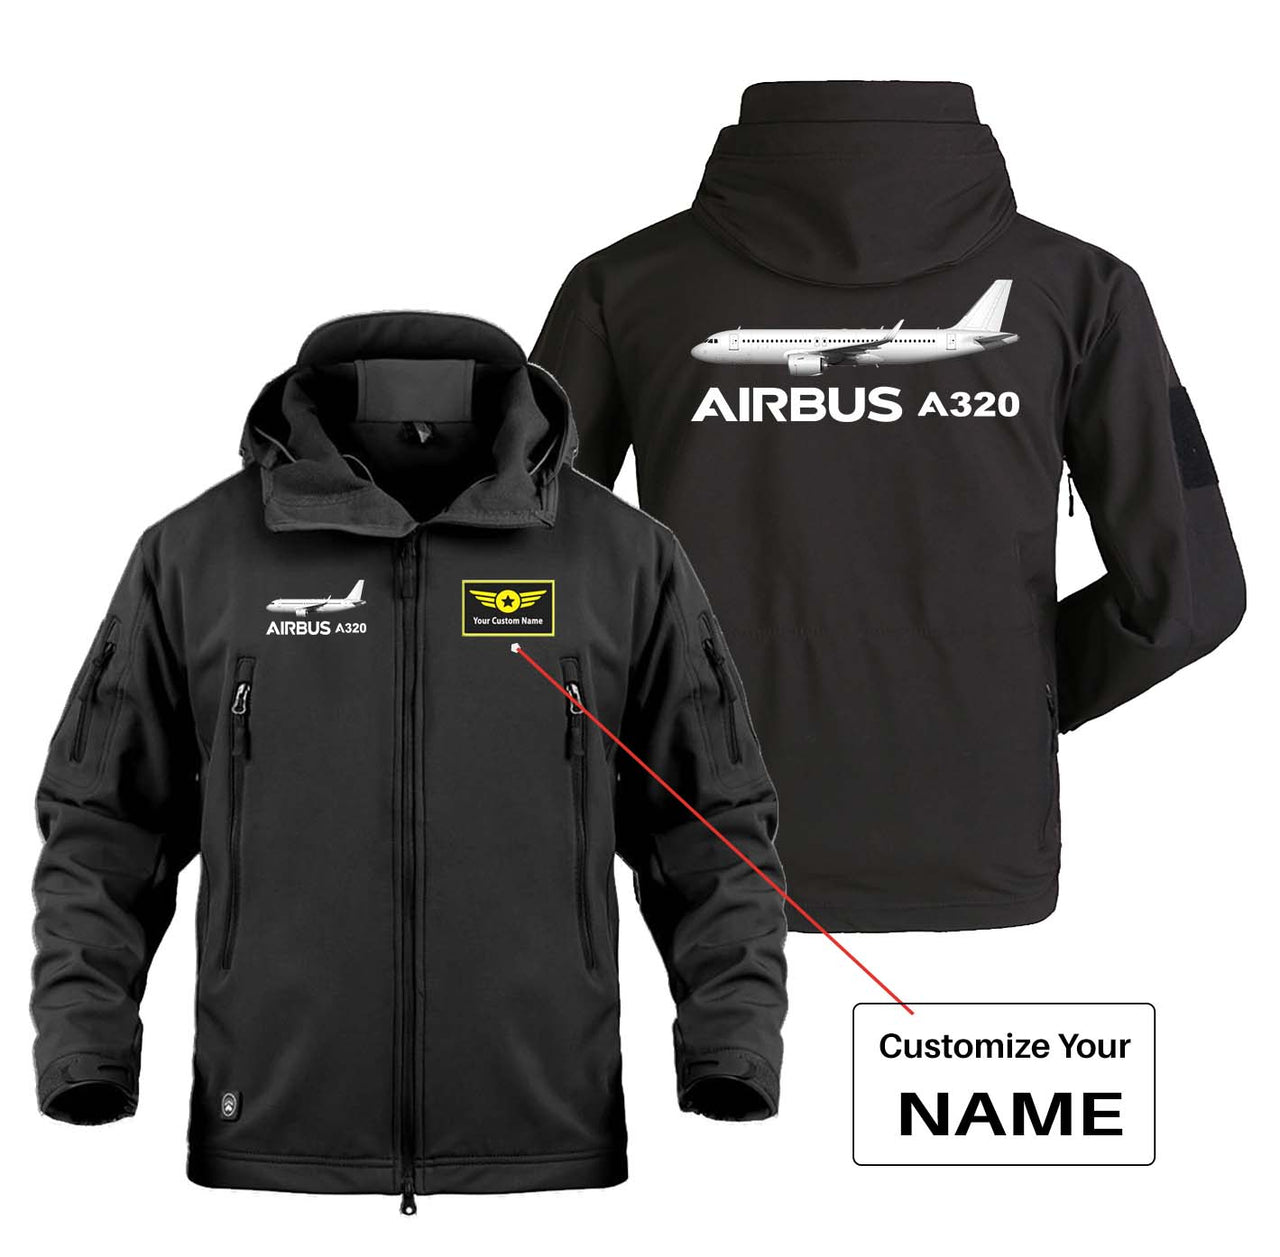 The Airbus A320 Designed Military Jackets (Customizable)